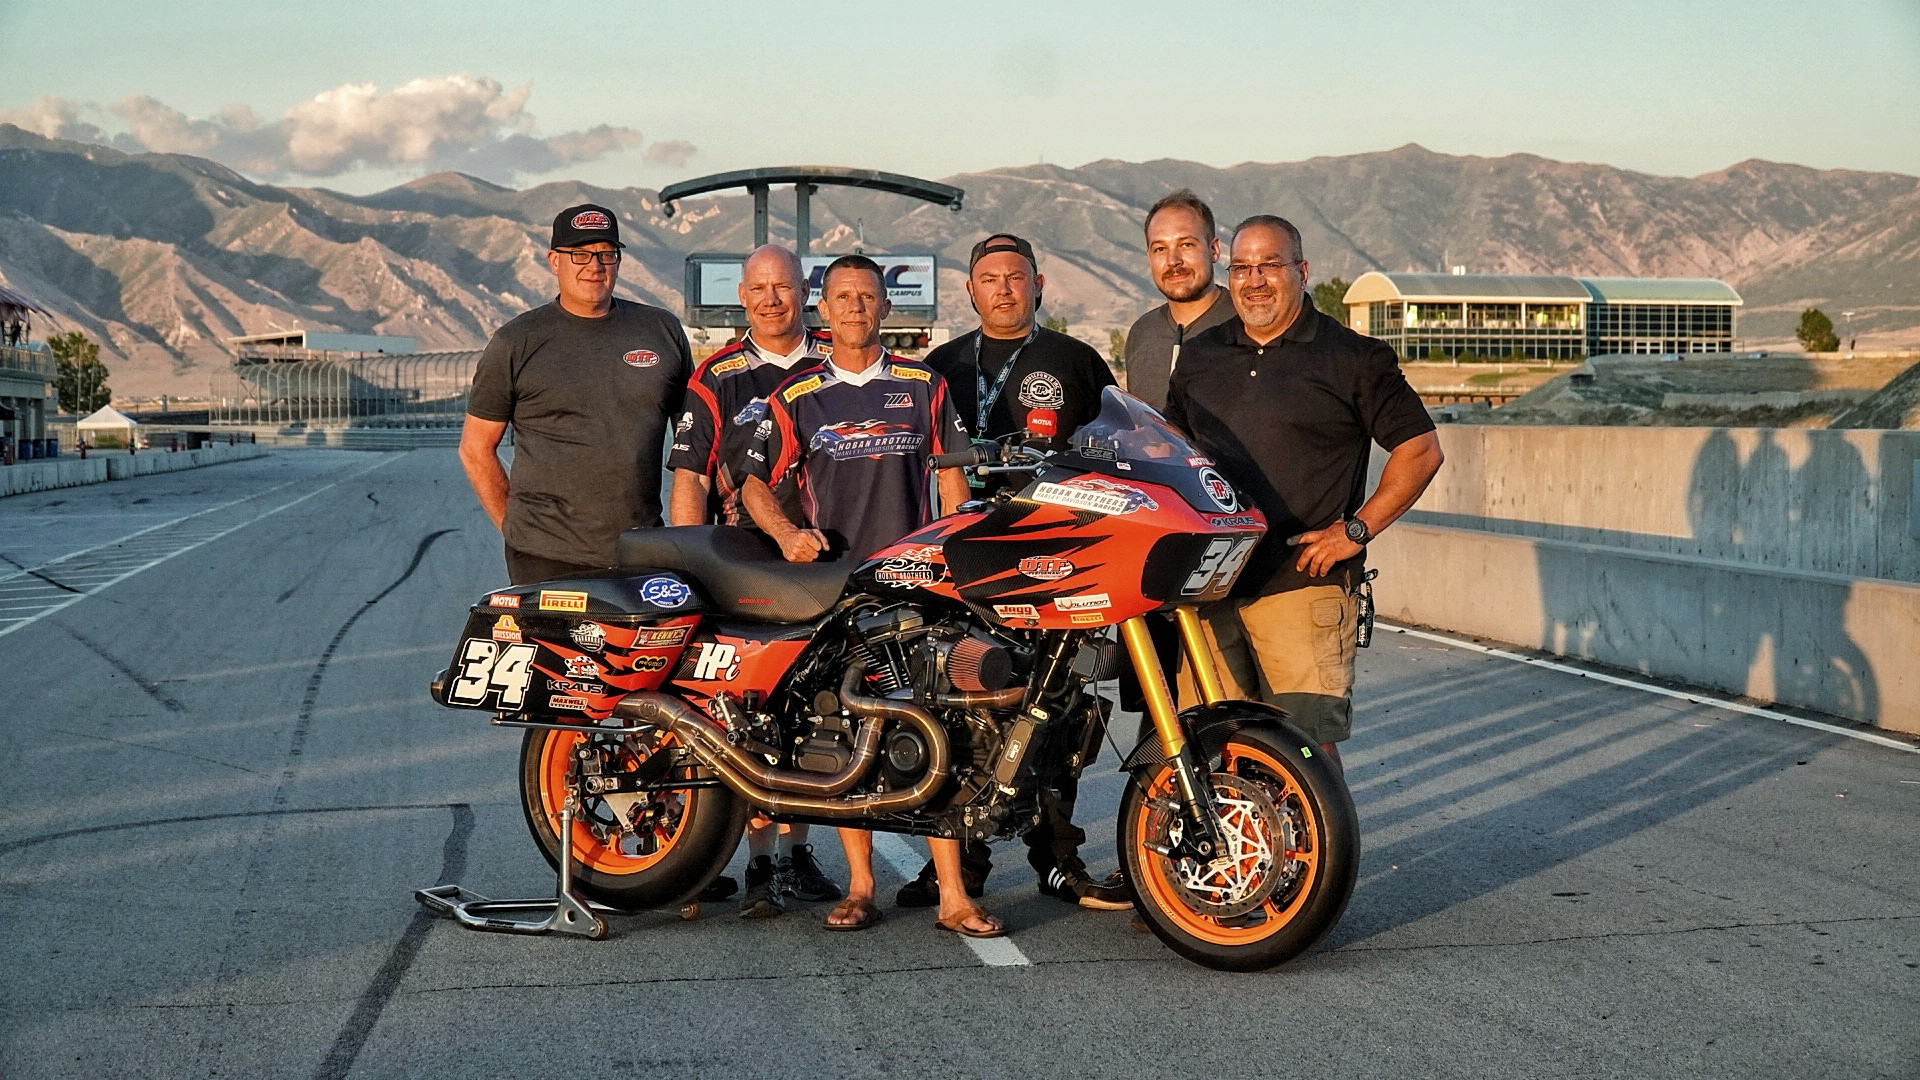 Michael Barnes (center) and the Hoban Brothers Racing/ DTF Performance race team dominated the Bagger Racing League Premier Bagger GP race weekend. Photo by Derek Cloutier/Wicked Windage Photography, courtesy Harley-Davidson.